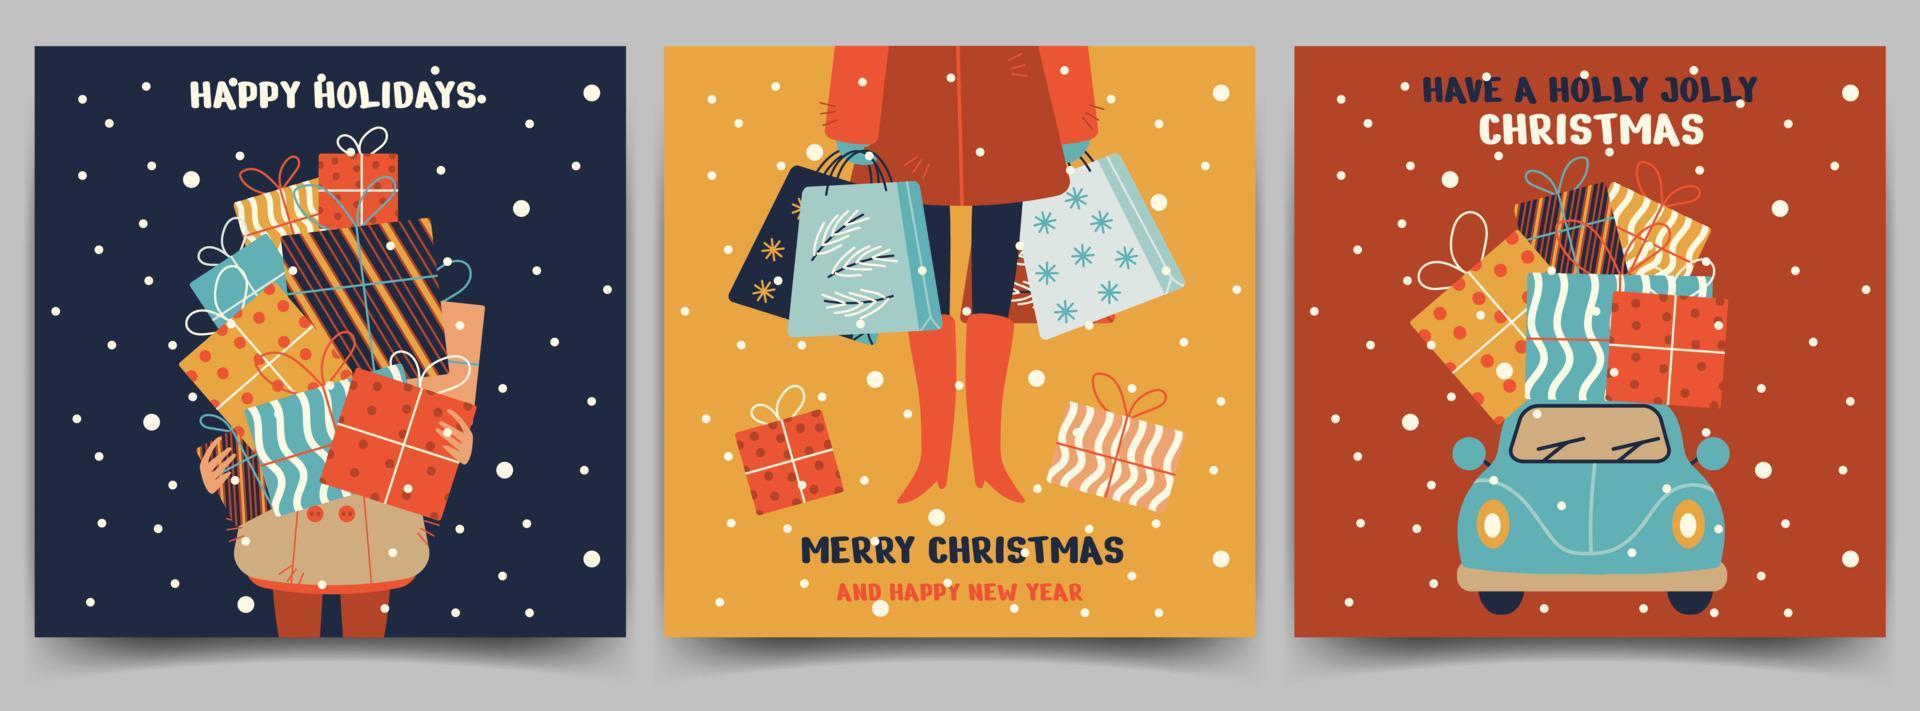 Christmas holiday cards. Square postcard templates with people, car and gifts. Merry christmas, happy holidays, holly jolly text. Vector illustration.